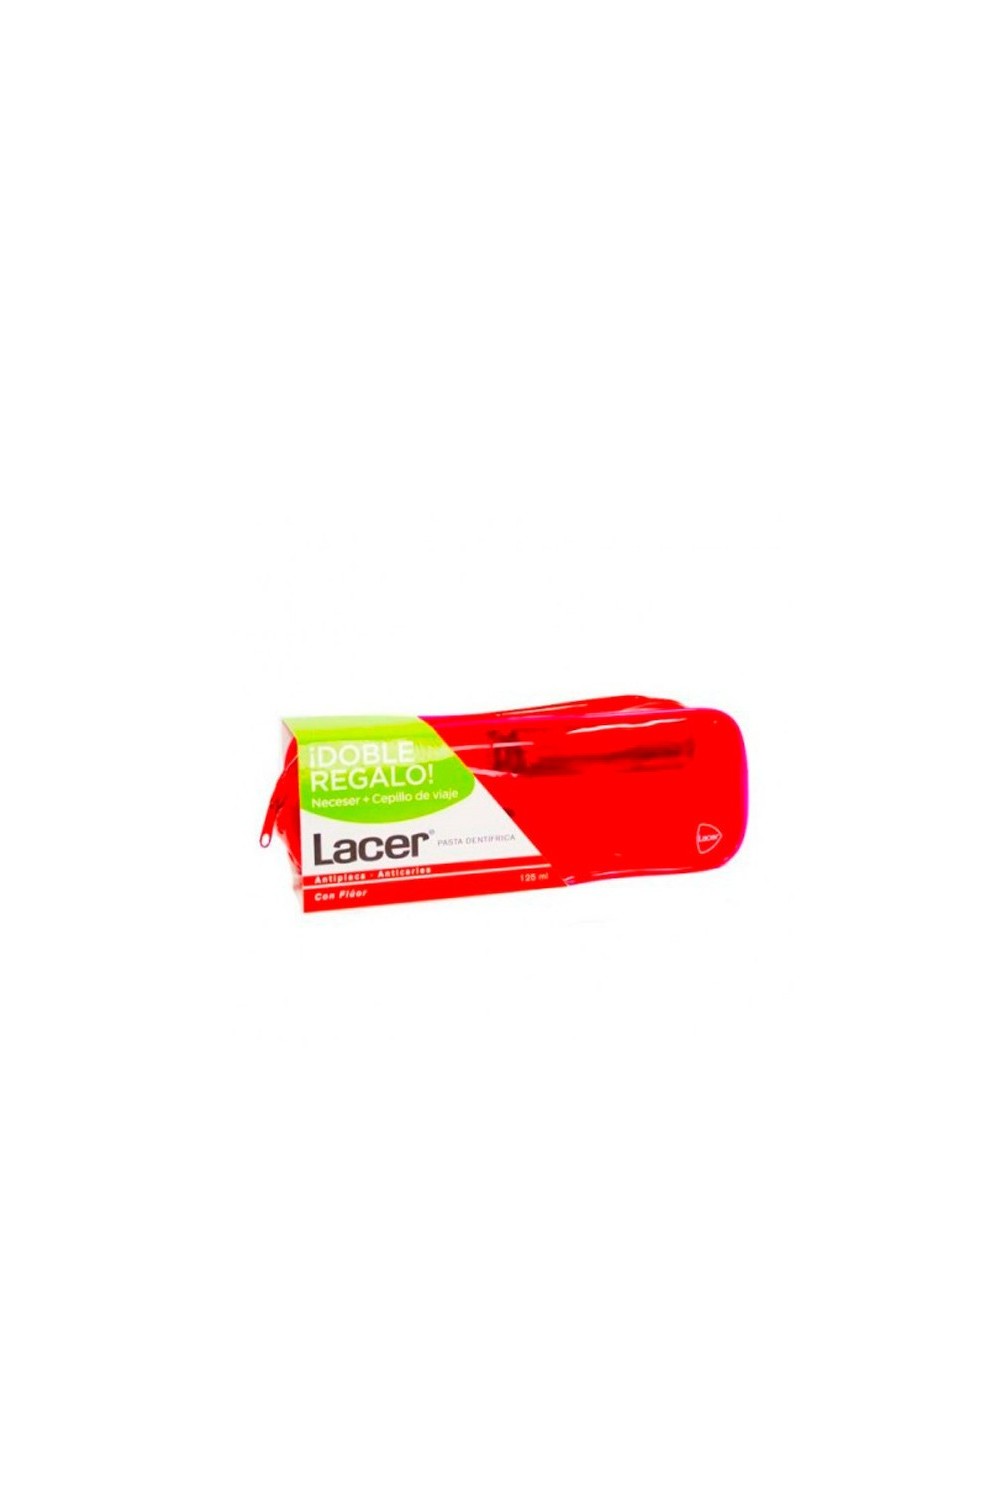 Lacer Toothpaste 125ml + Travel Toothbrush Gift